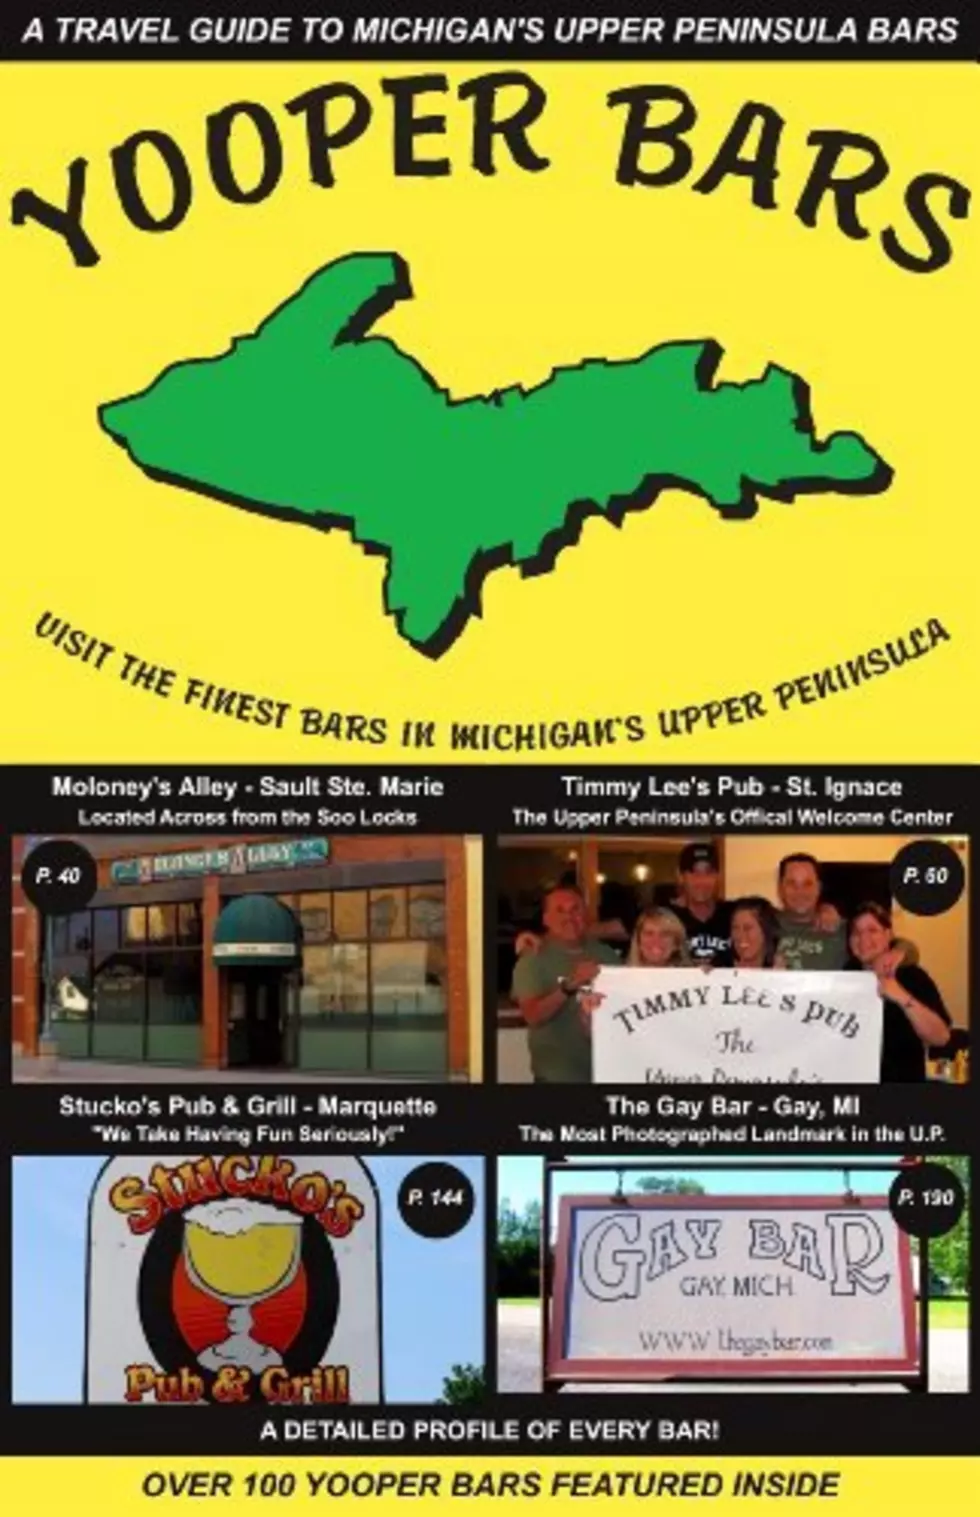 Drinking Guide To The Upper Peninsula Remains A Cult Classic [Video]